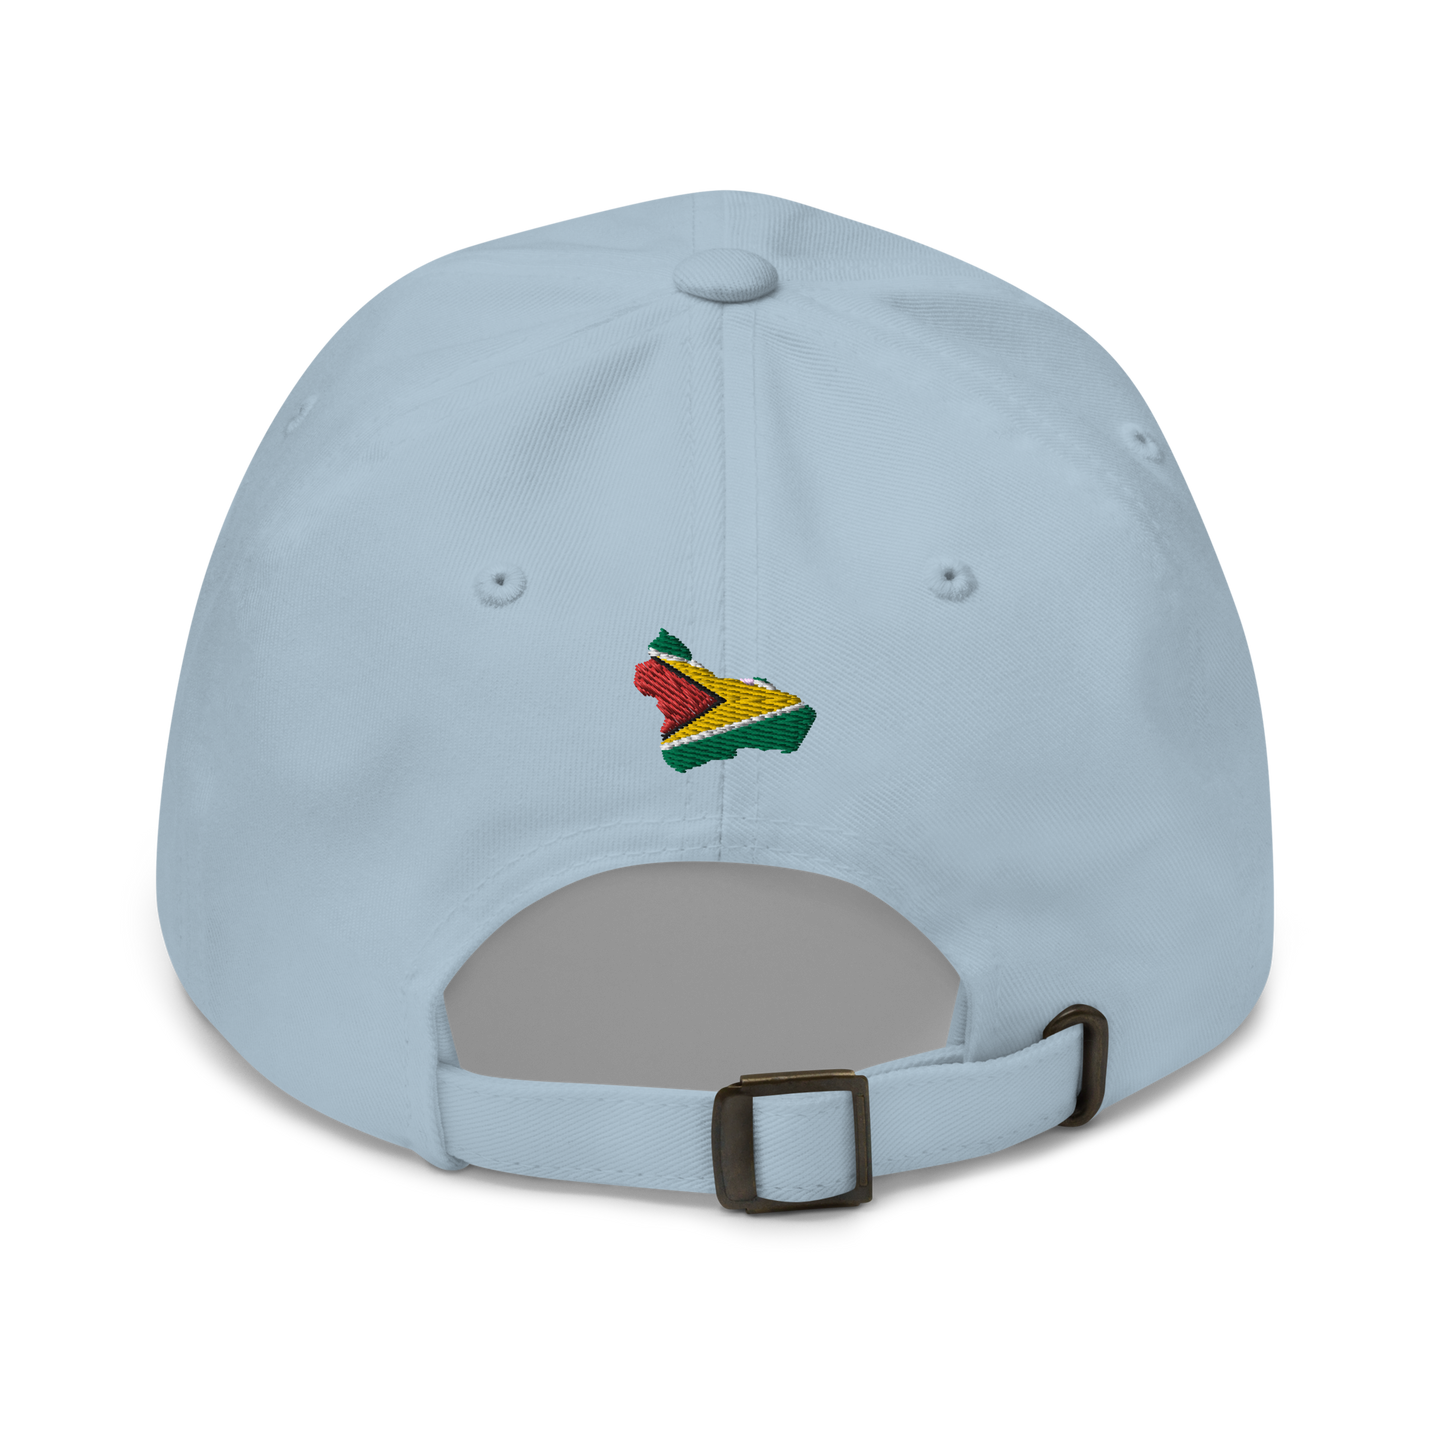 I Am Rooting: Guyana Dad hat